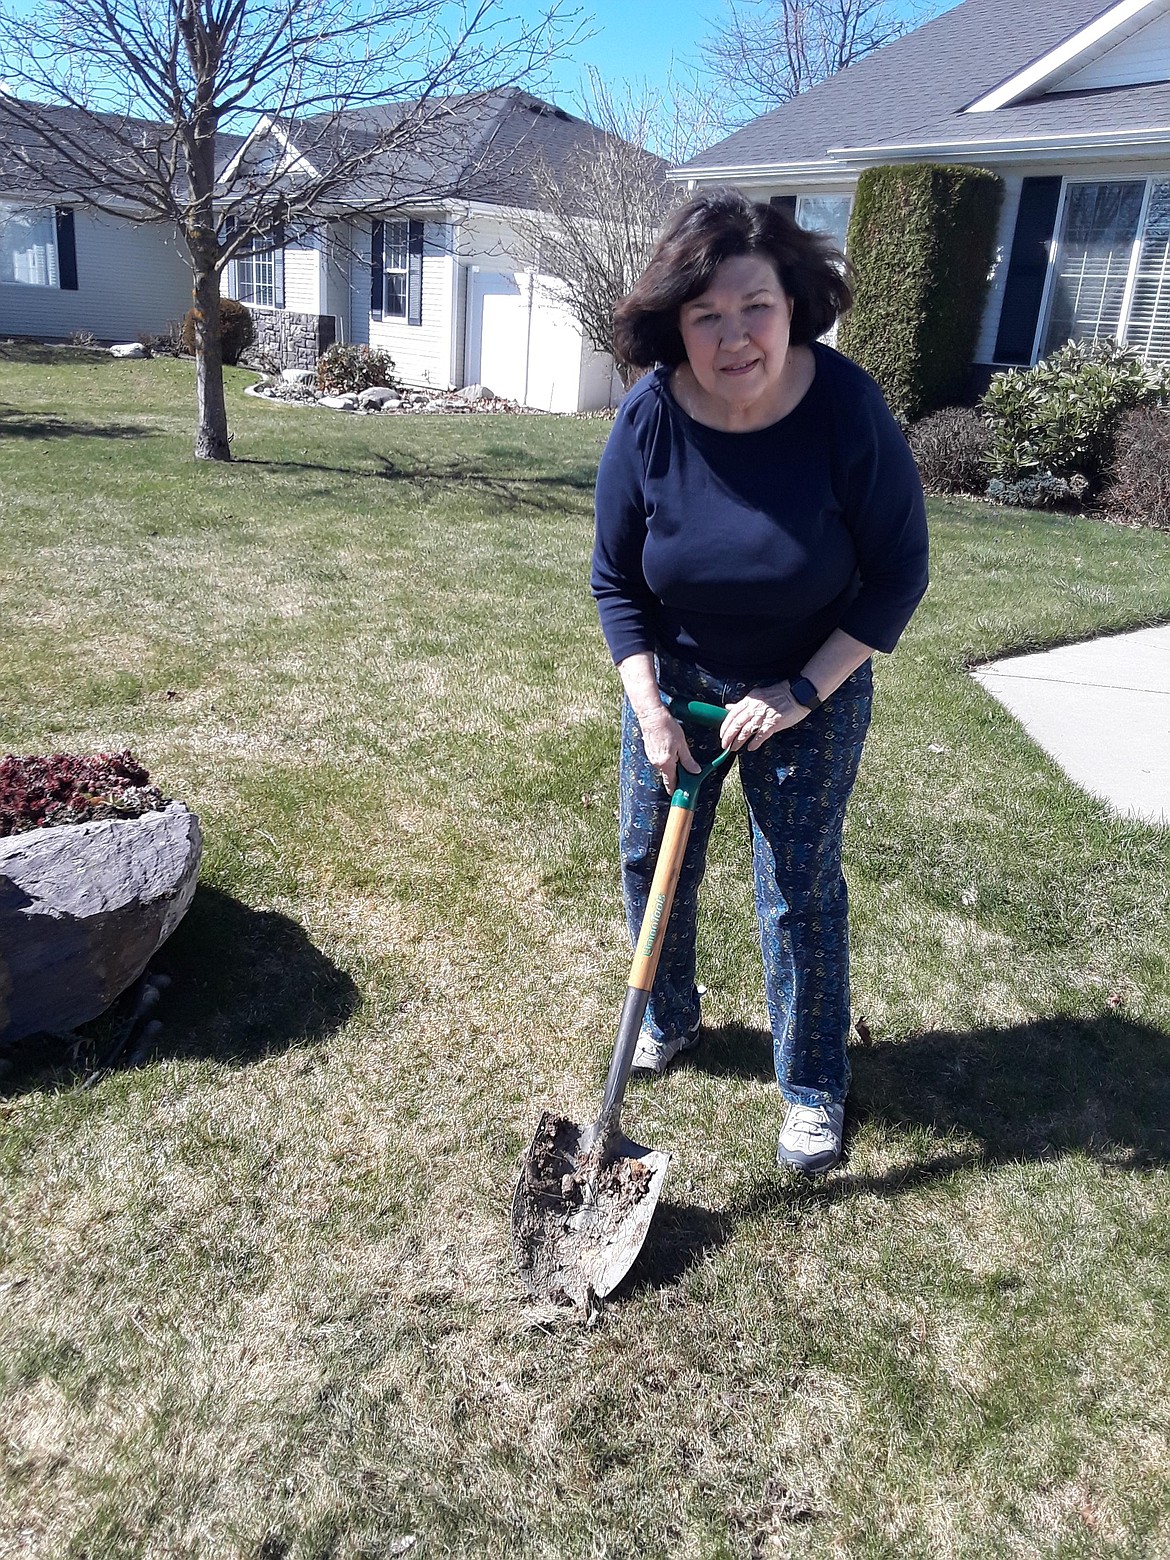 Gloria Wurm and the shovel she used to clean a pile of feces left on her lawn in the early Tuesday morning hours. The Kootenai County Sheriff's Office is investigating the vandalism, in which Wurm's porch flag showing support for then-candidate Joe Biden was ripped off her wall. (CRAIG NORTHRUP/Press)